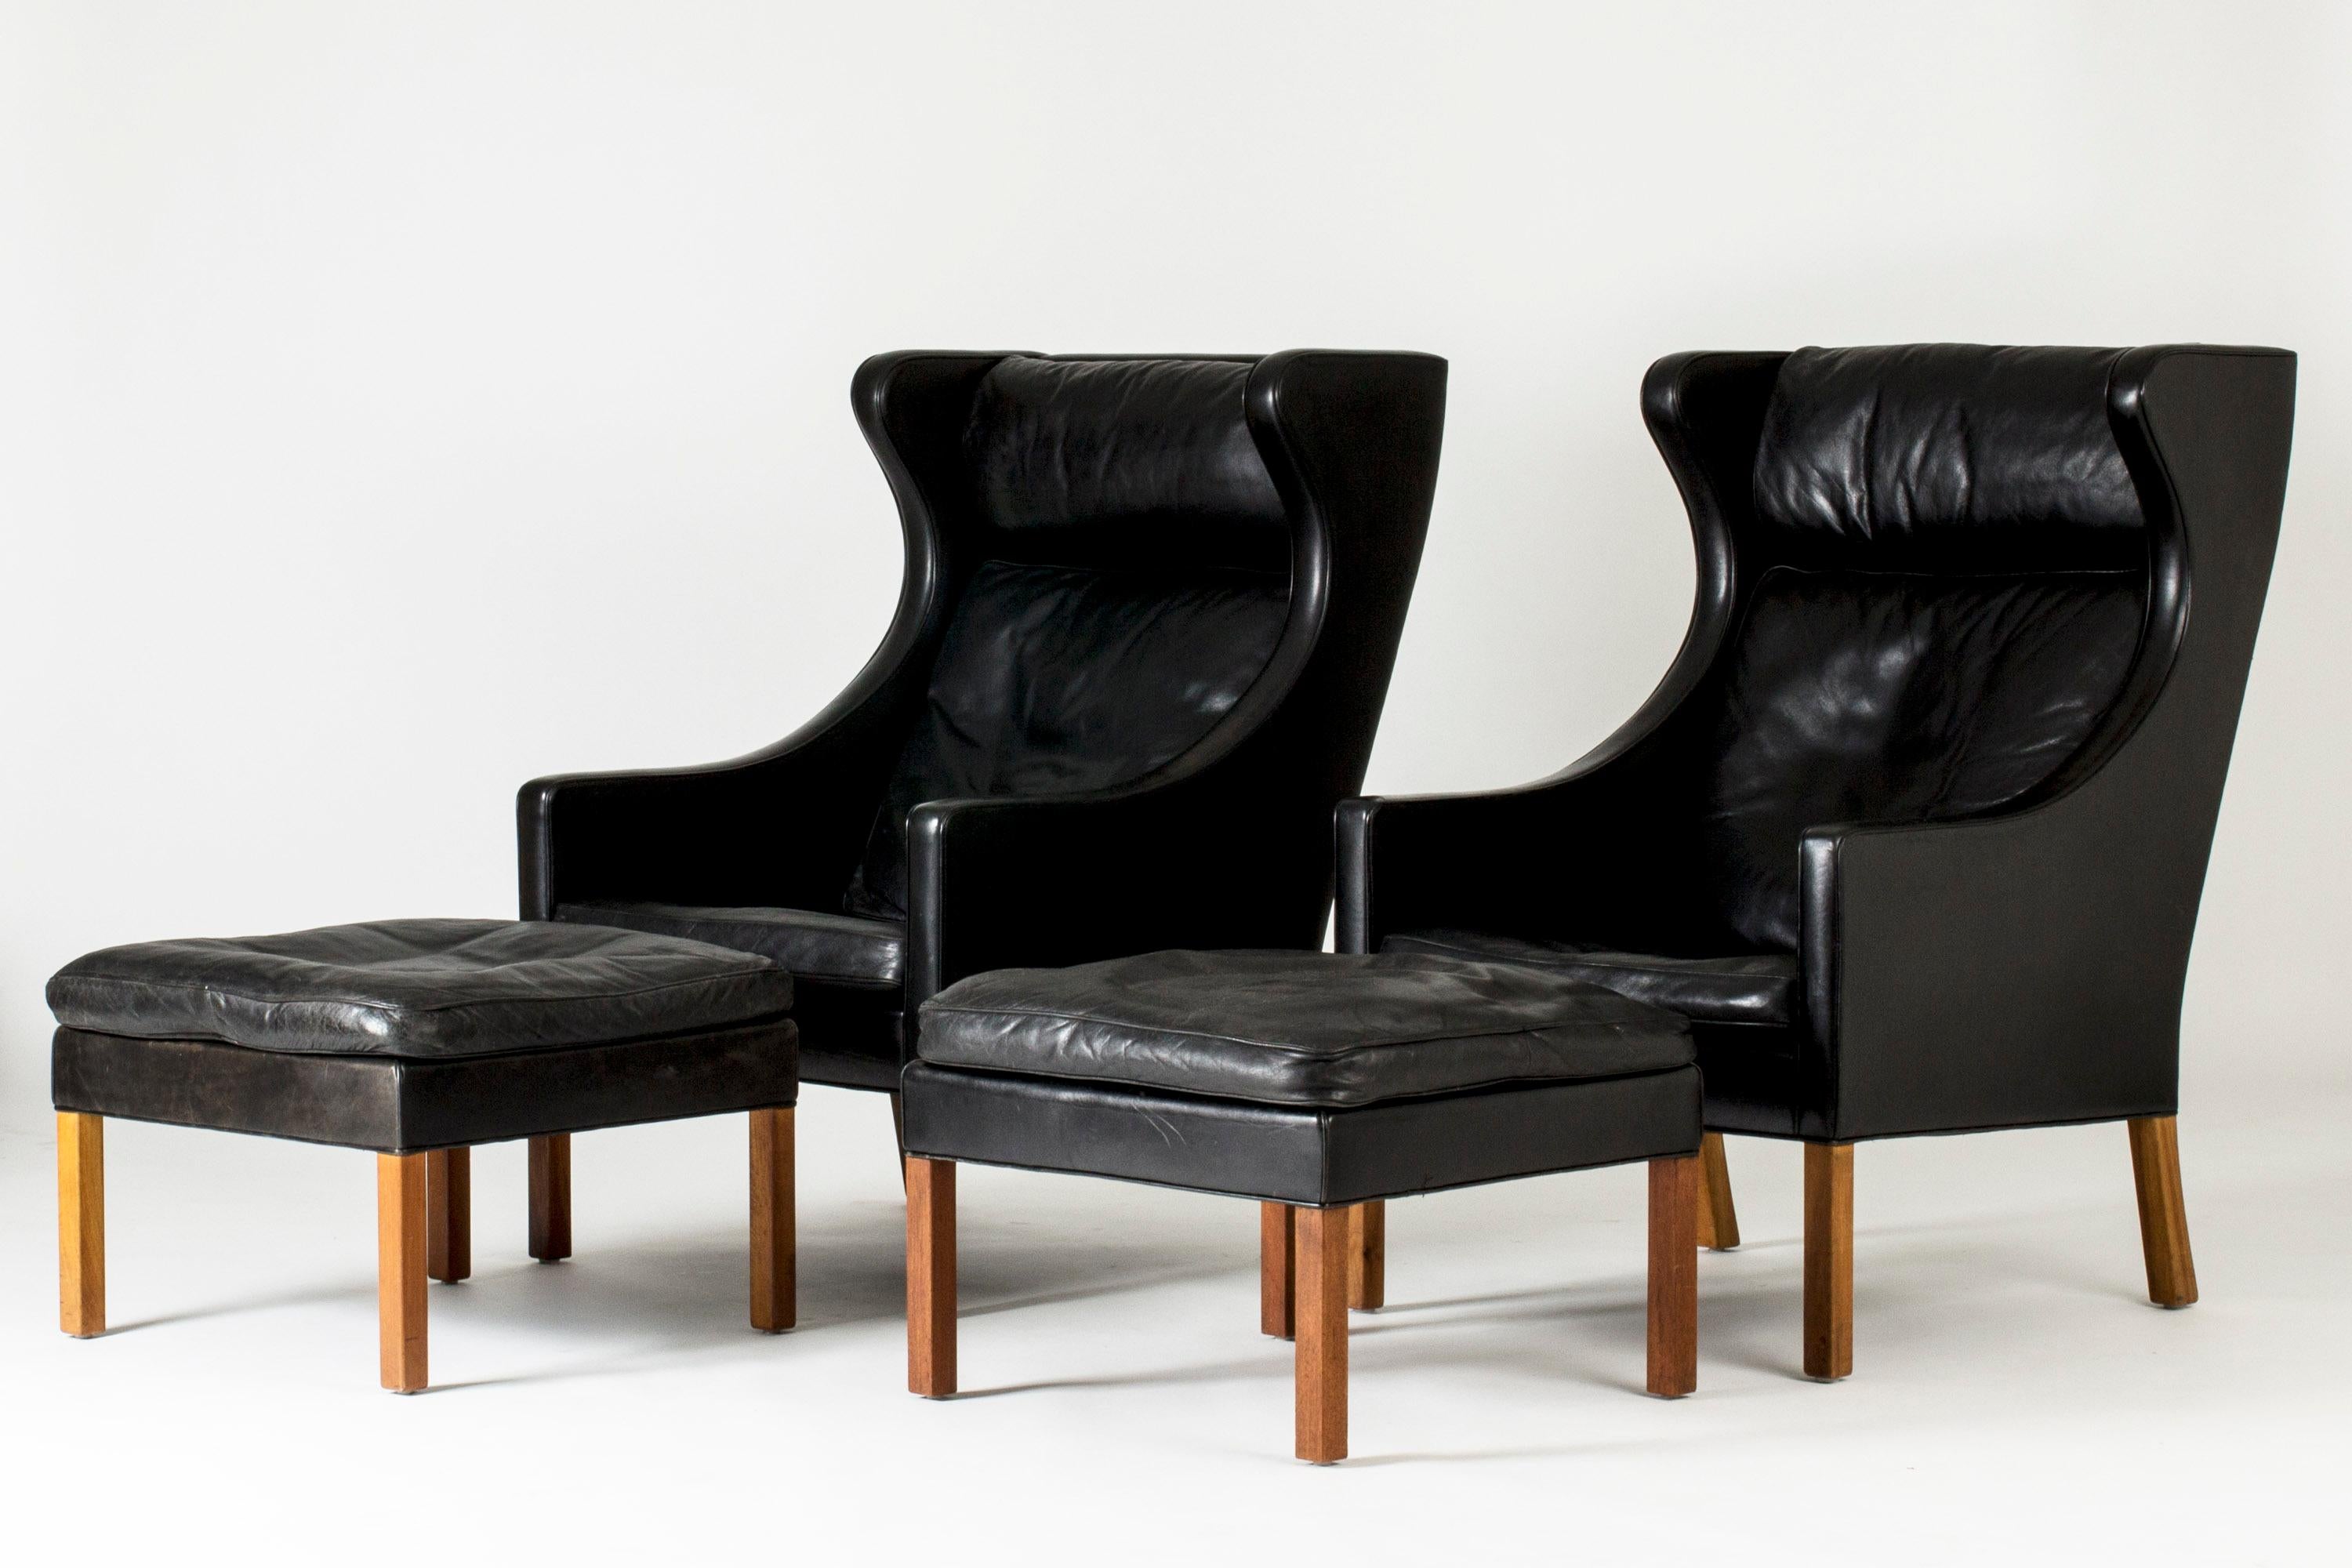 Pair of “2204” lounge chairs with ottomans by Børge Mogensen. Elegant, bold lines. Comfy and relaxing to be seated in.

Measures: Height 105 cm (chairs), 40 cm (ottomans)
Width 70 cm (chairs), 60 cm (ottomans)
Depth 80 cm (chairs), 60 cm